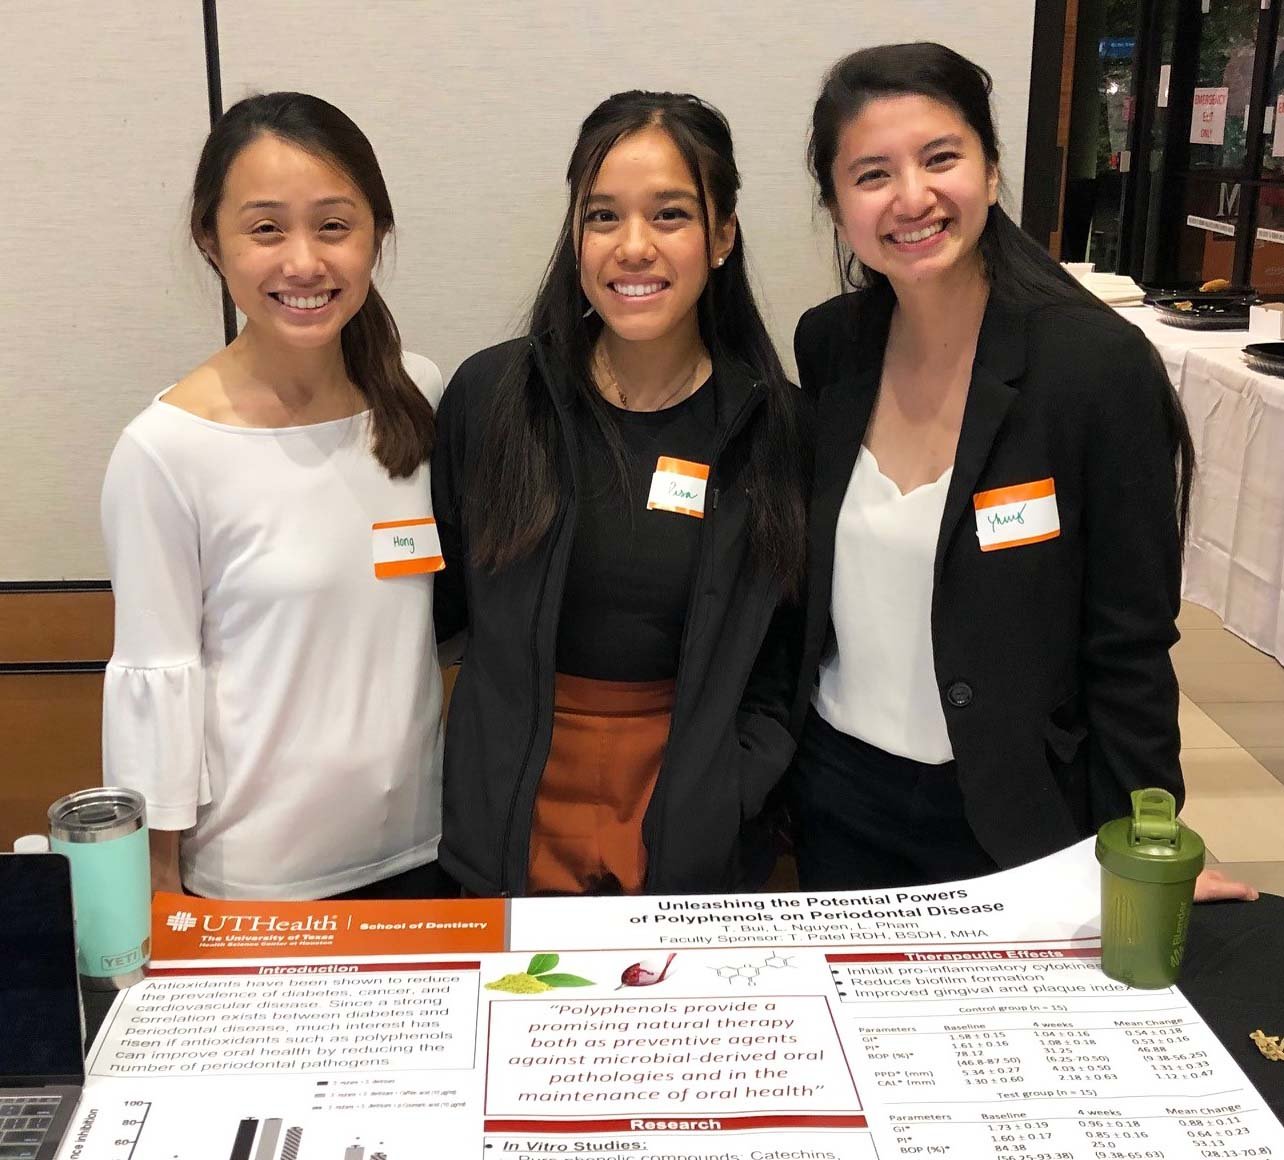 From left are Lac-Hong Pham, Lisa Nguyen, and Thuy Bui, who tied for second place in the GHDHS scientific poster competition.